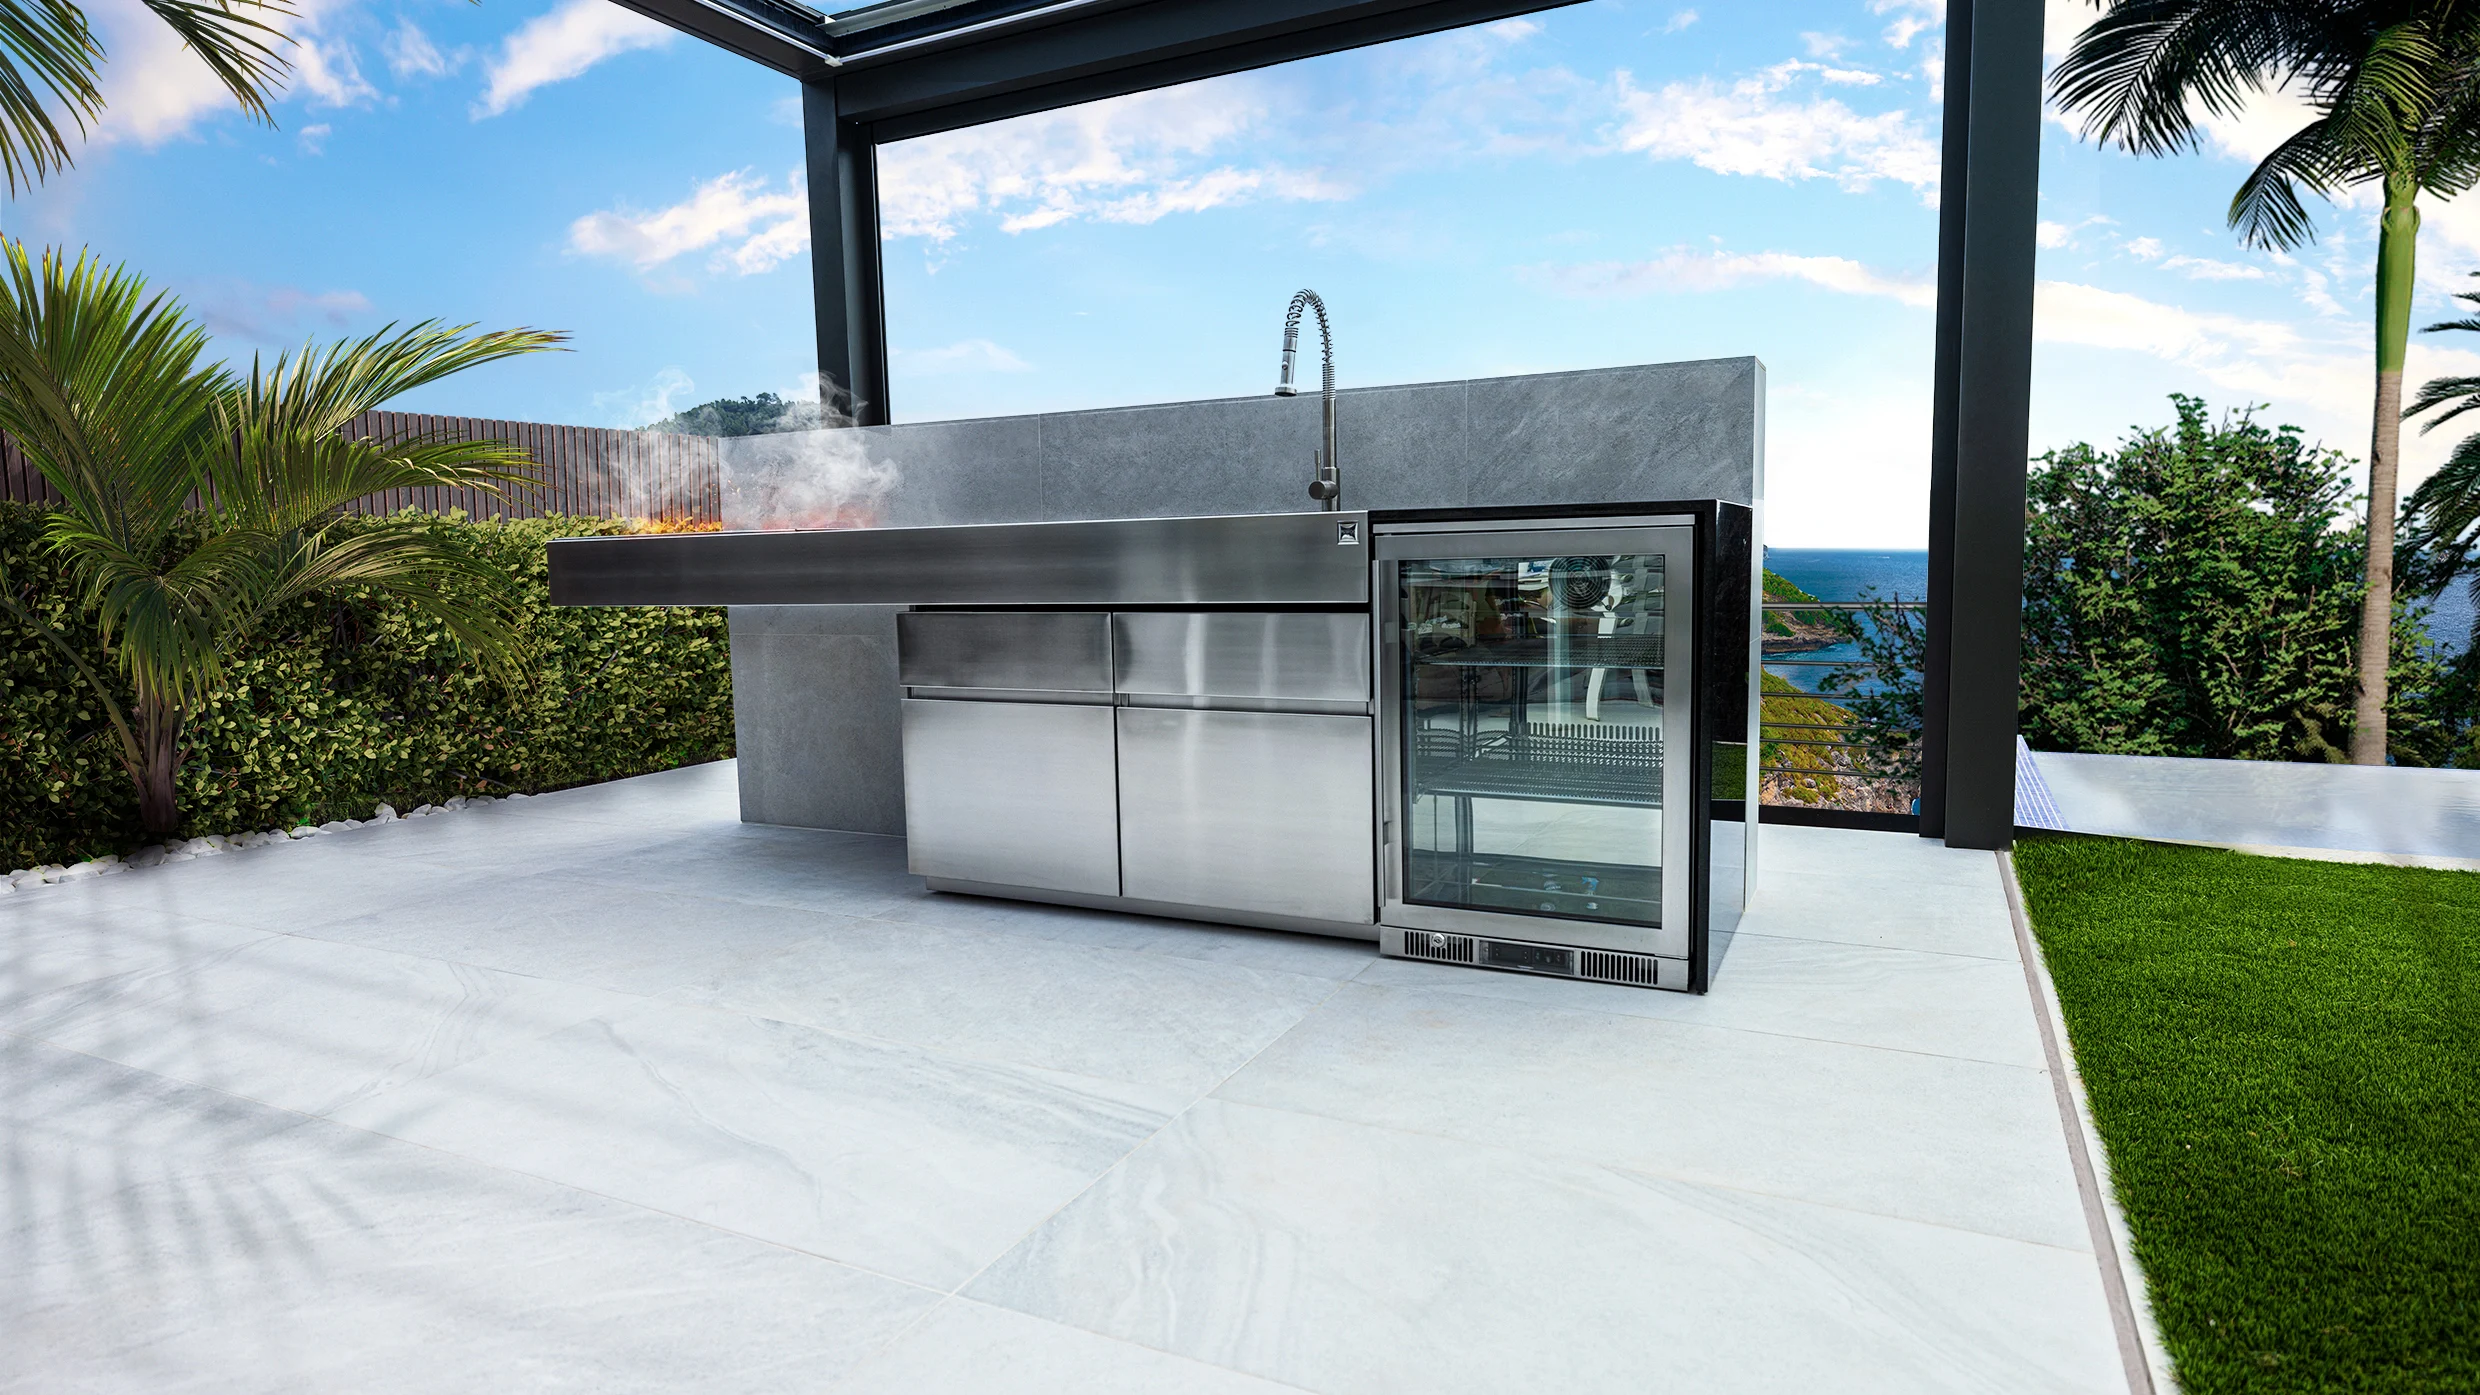 stainless steel outdoor kitchens